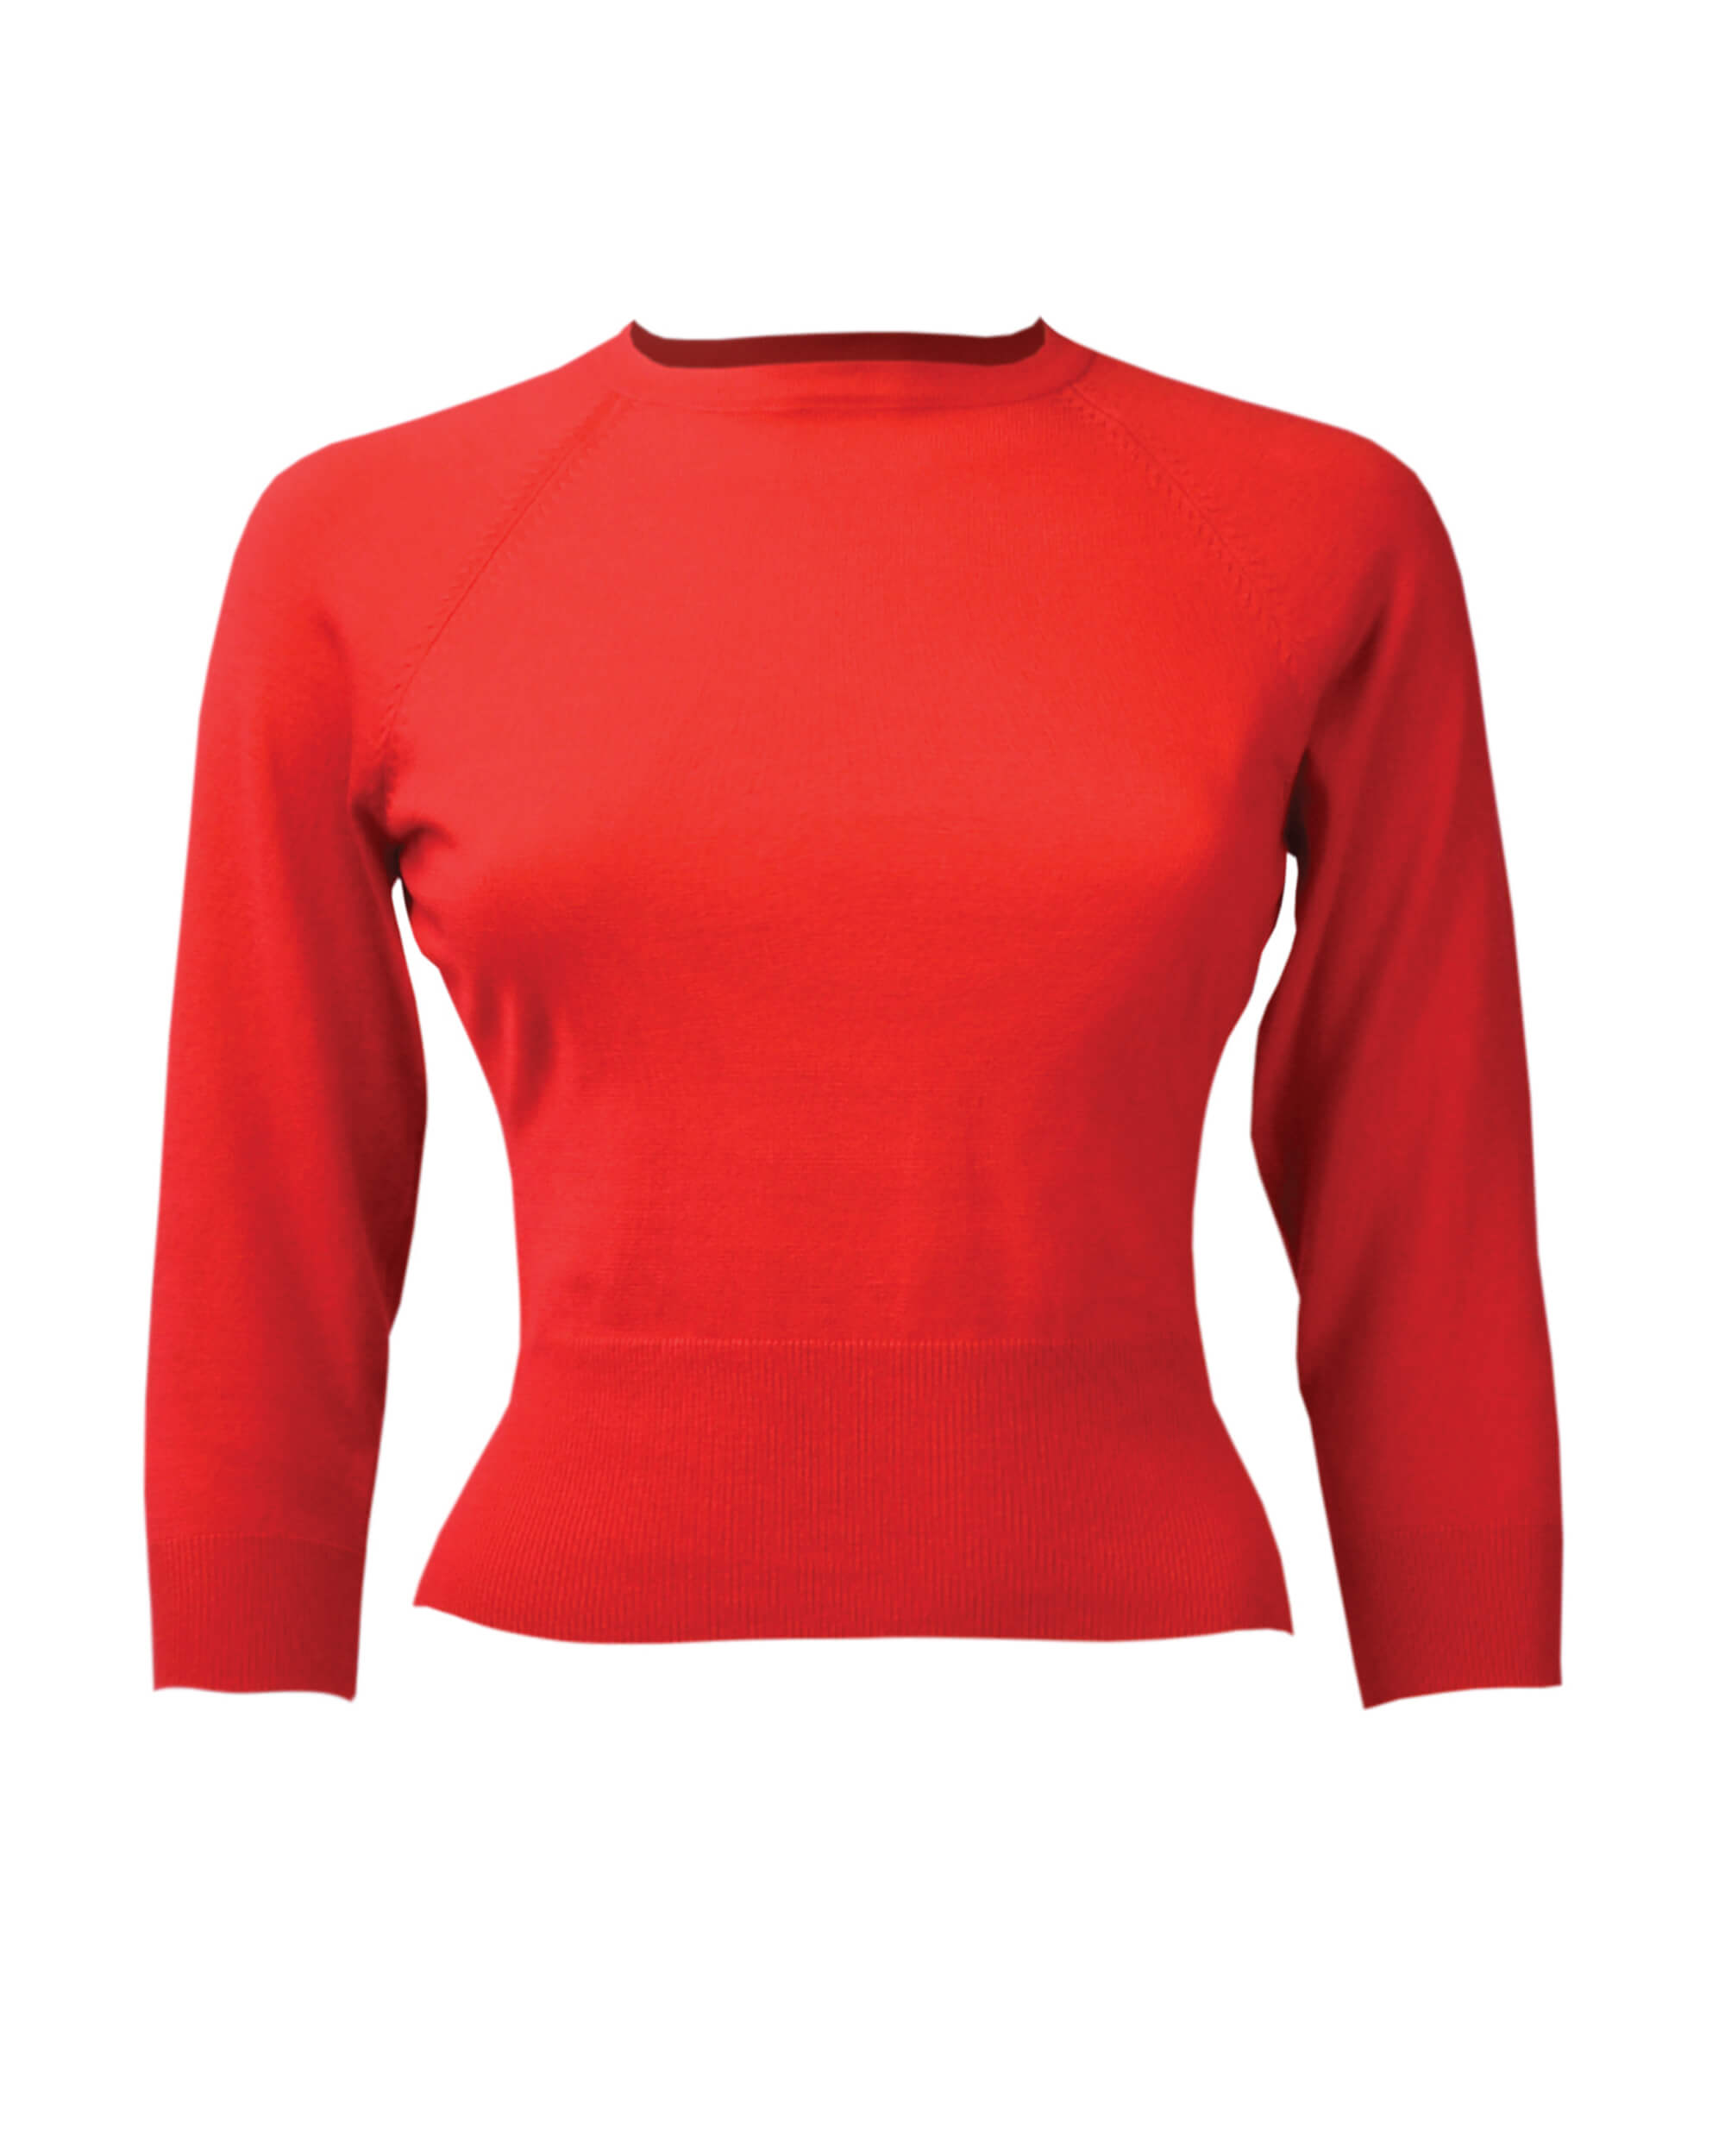 Sweater Girl Top - Red